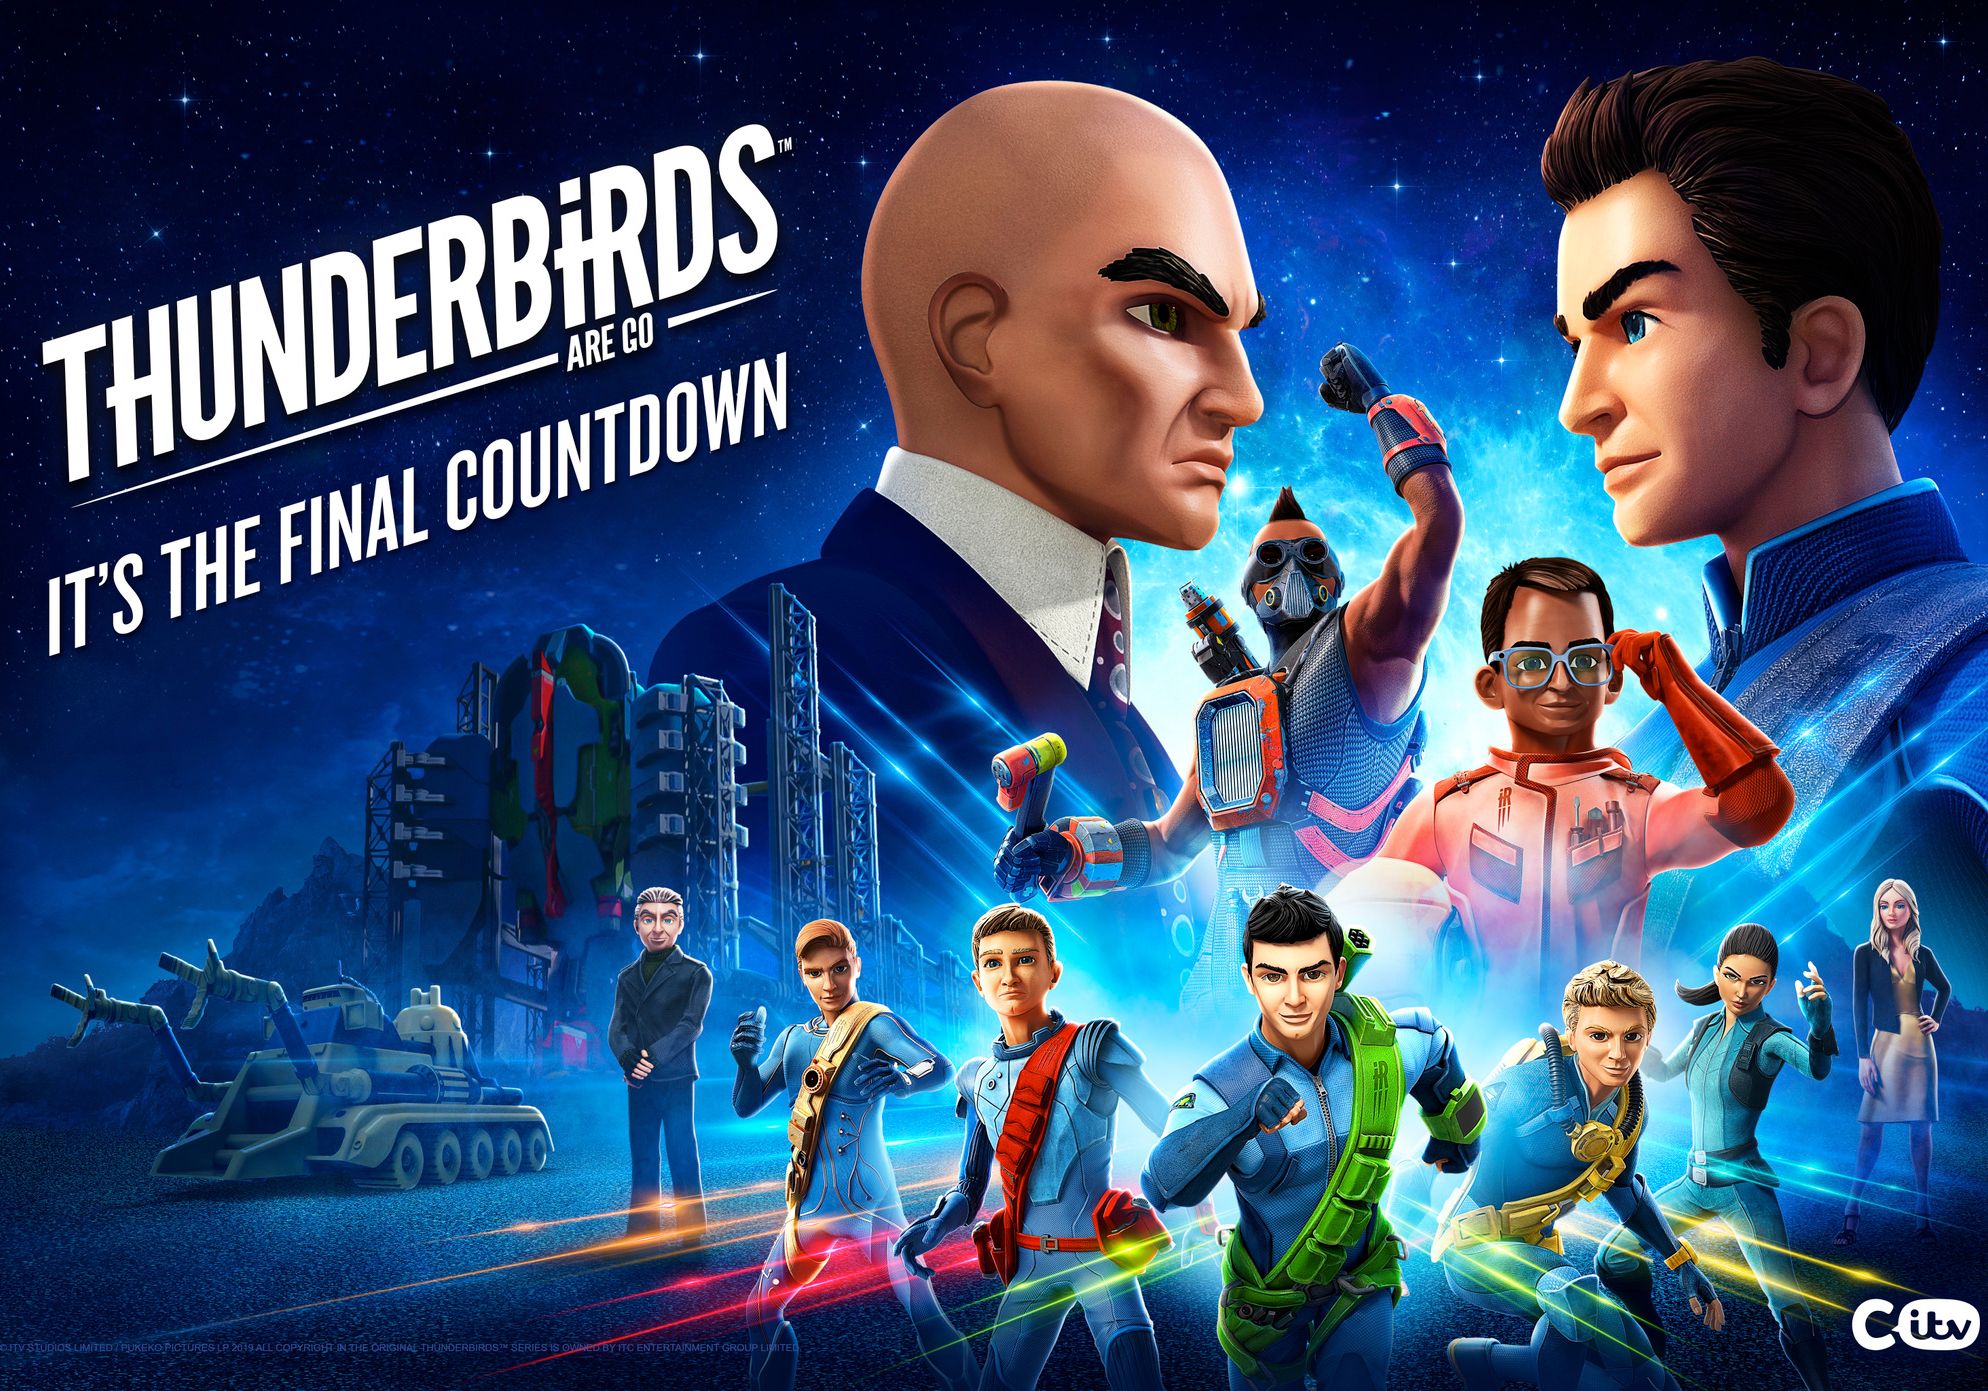 Thunderbirds Are Go returns - National Geographic Kids